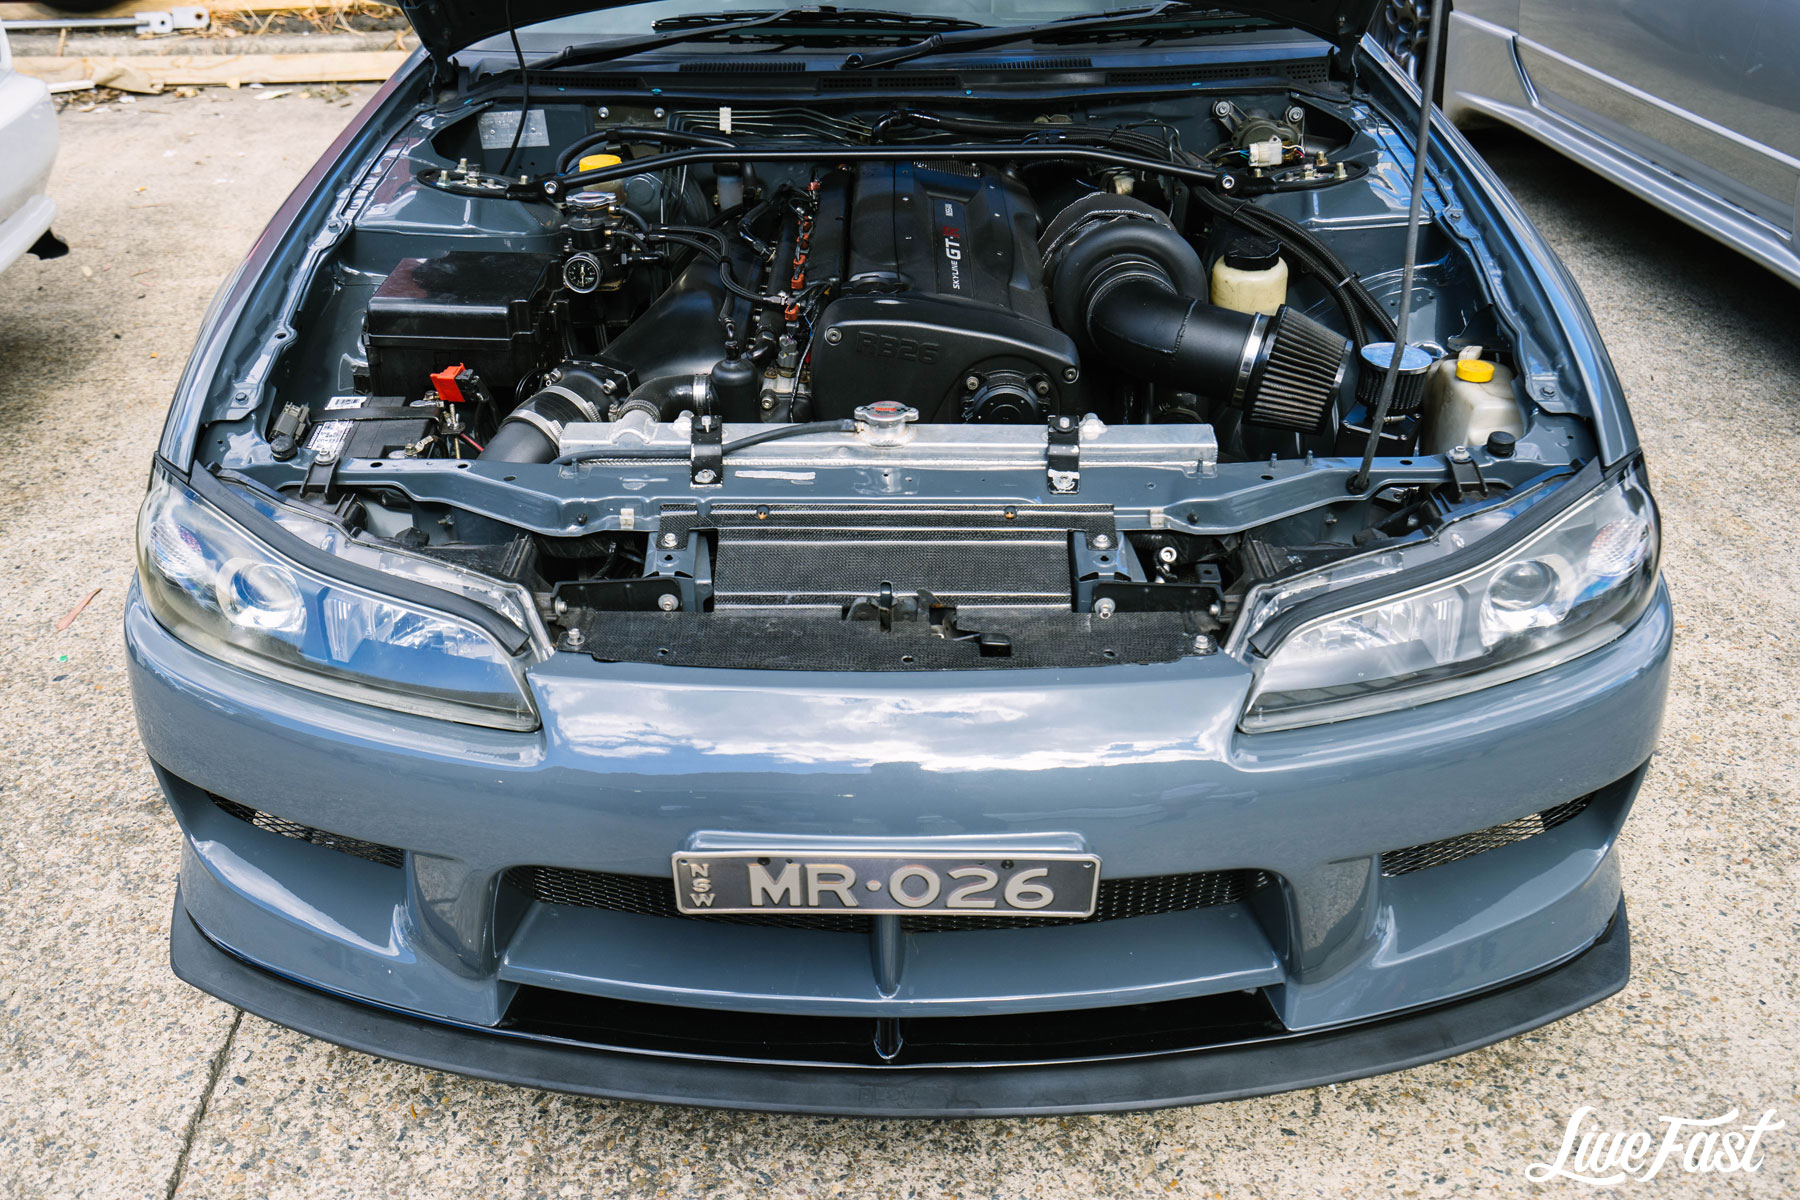 Introducing Our Project RB26/30 S15 Silvia